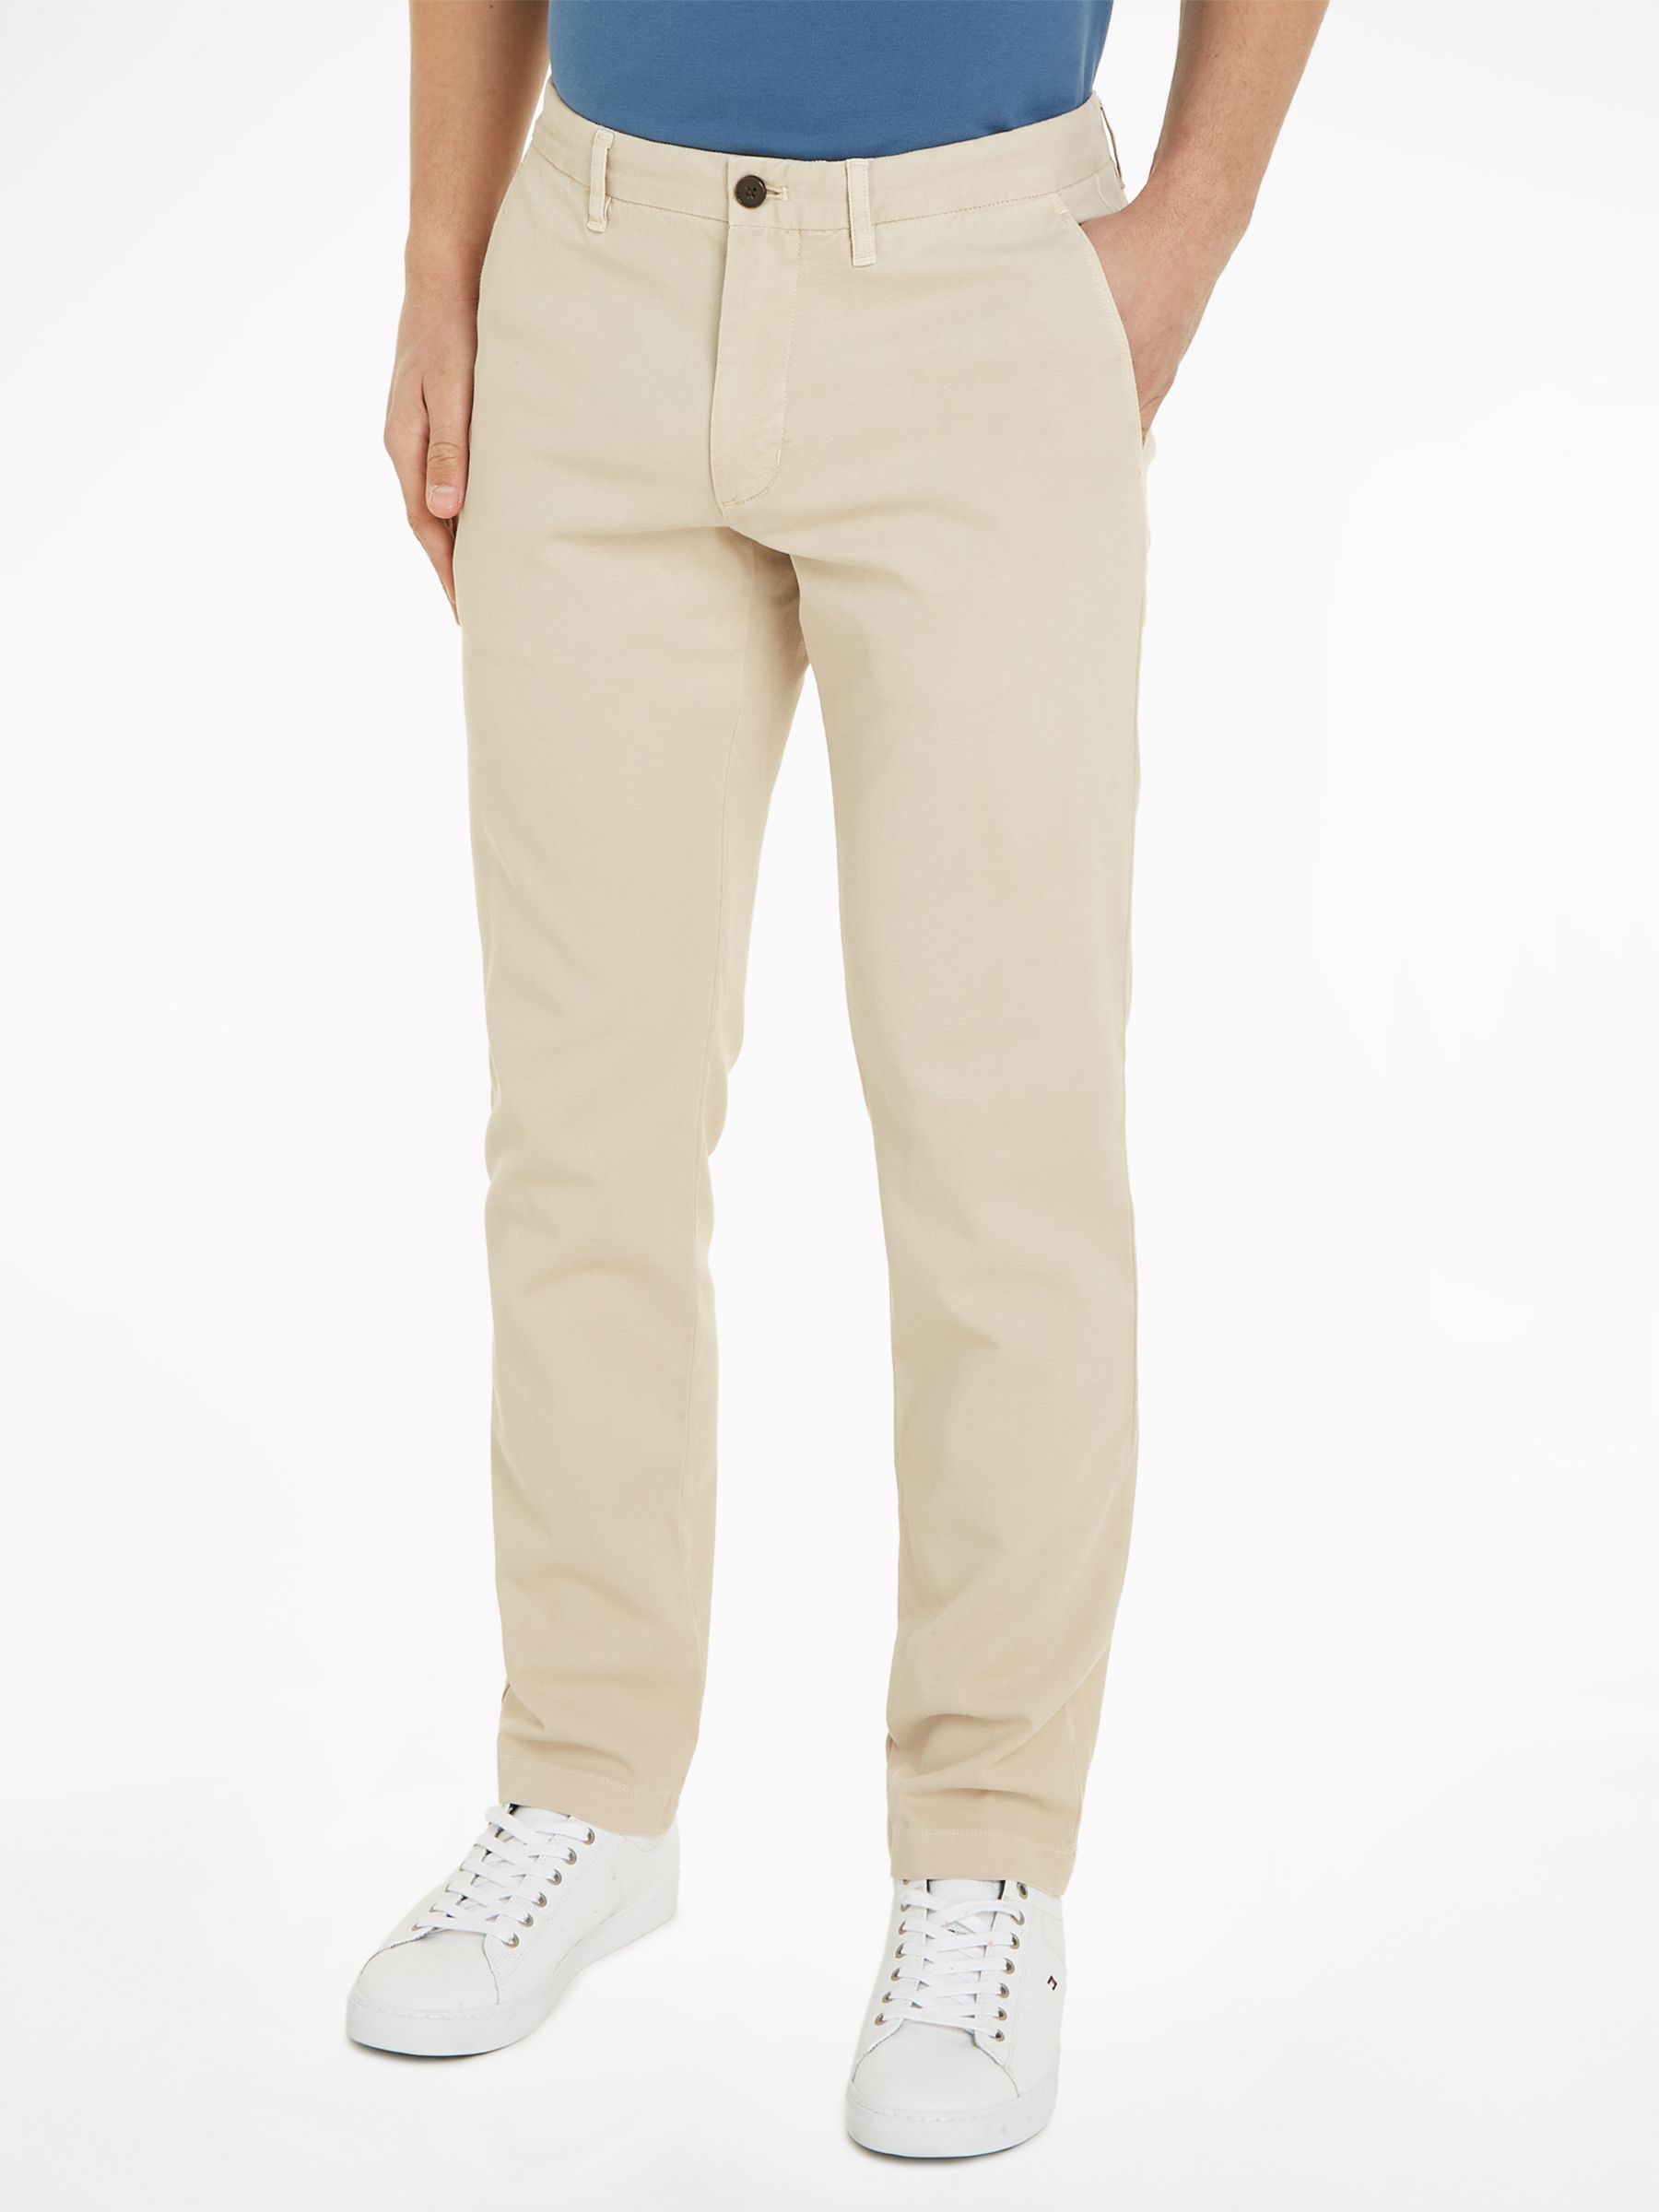 Tommy Hilfiger Denton Cotton Chinos, Bleached Stone